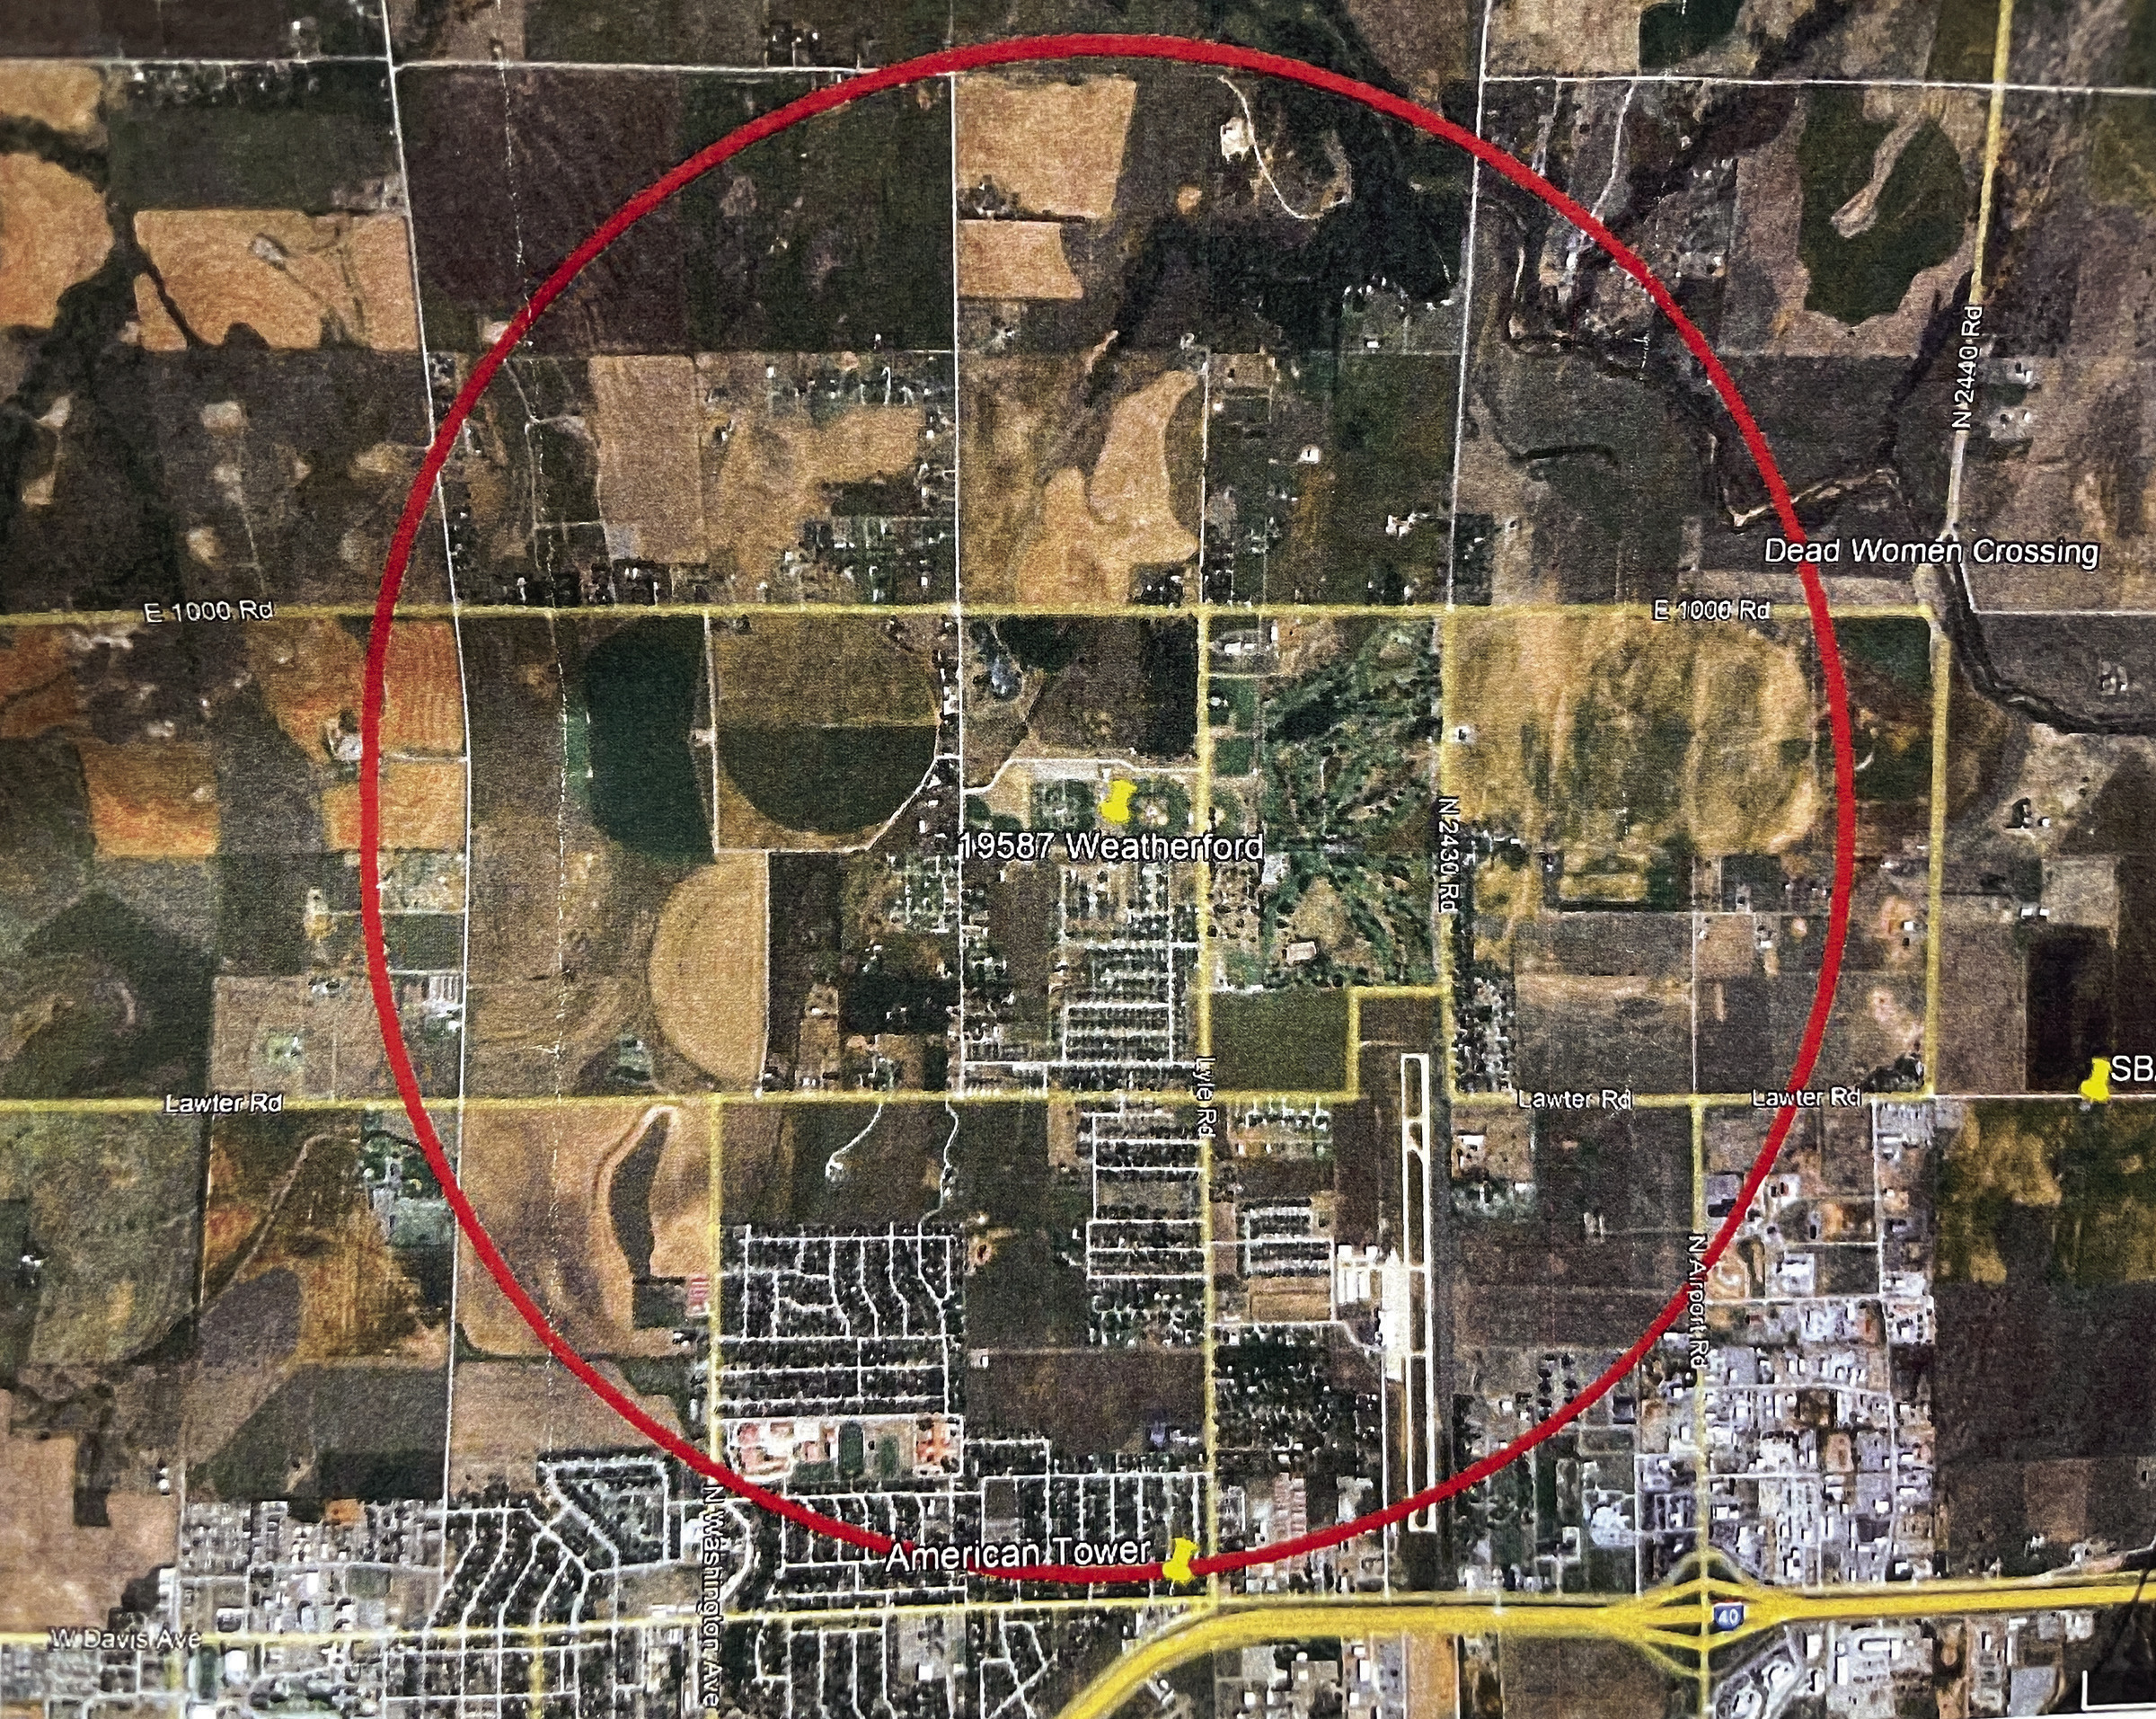 The Weatherford Planning and Zoning Committee will consider a request for a communication tower at its July 11 meeting. This map shows the area the tower covers. Provided ►